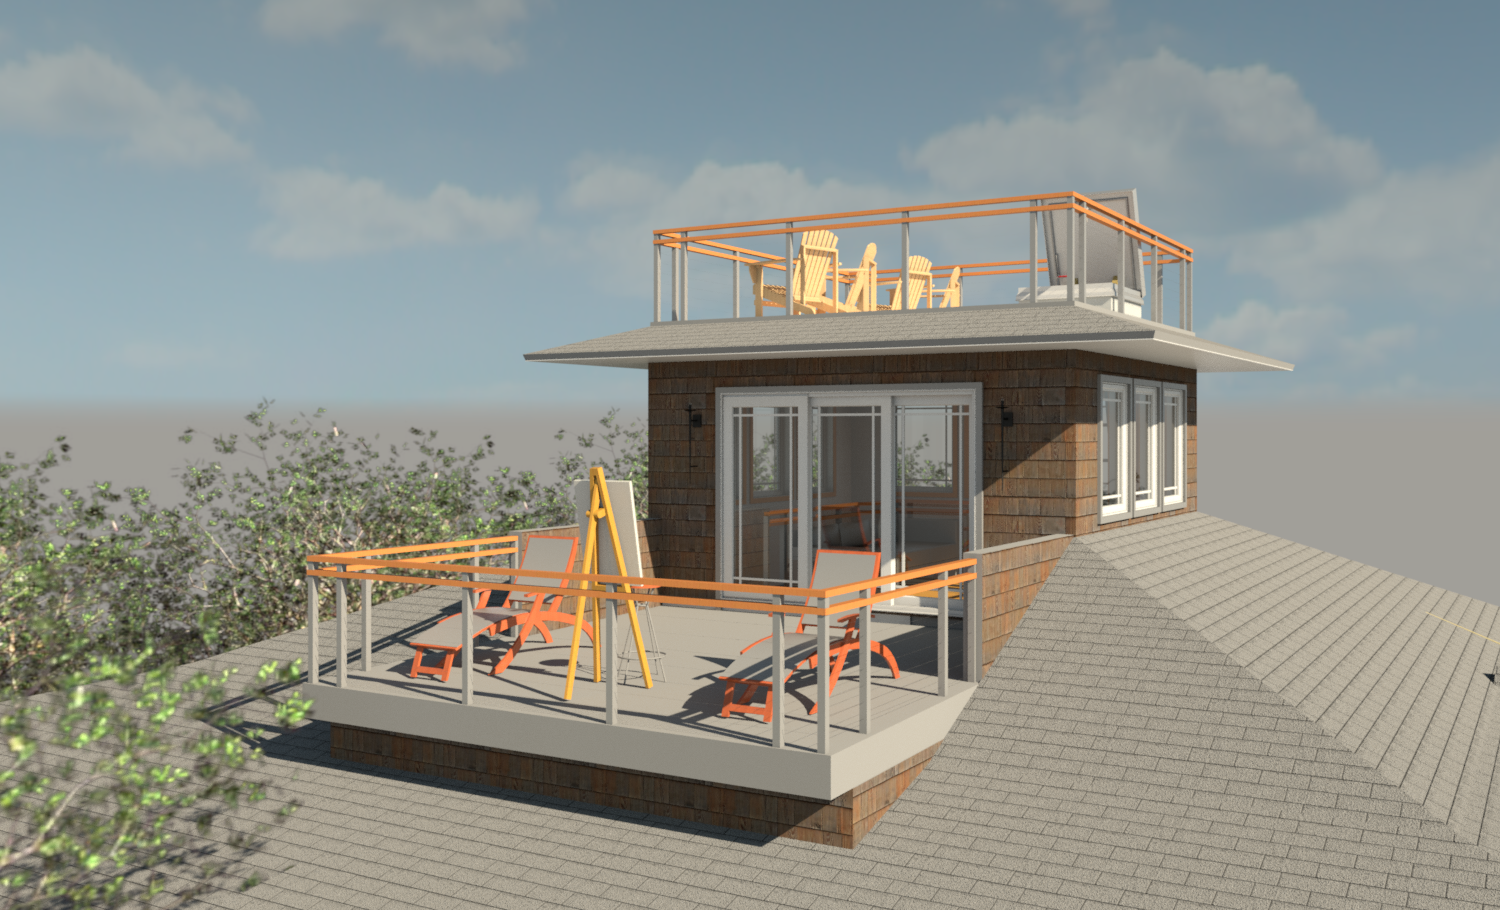 CAPTAIN_HOUSE_22_7TH_AVE.rvt_2018-Aug-10_01-10-49PM-000_PR_7TH_FROM_ROOF_TO_LOFT_DECK_png.png